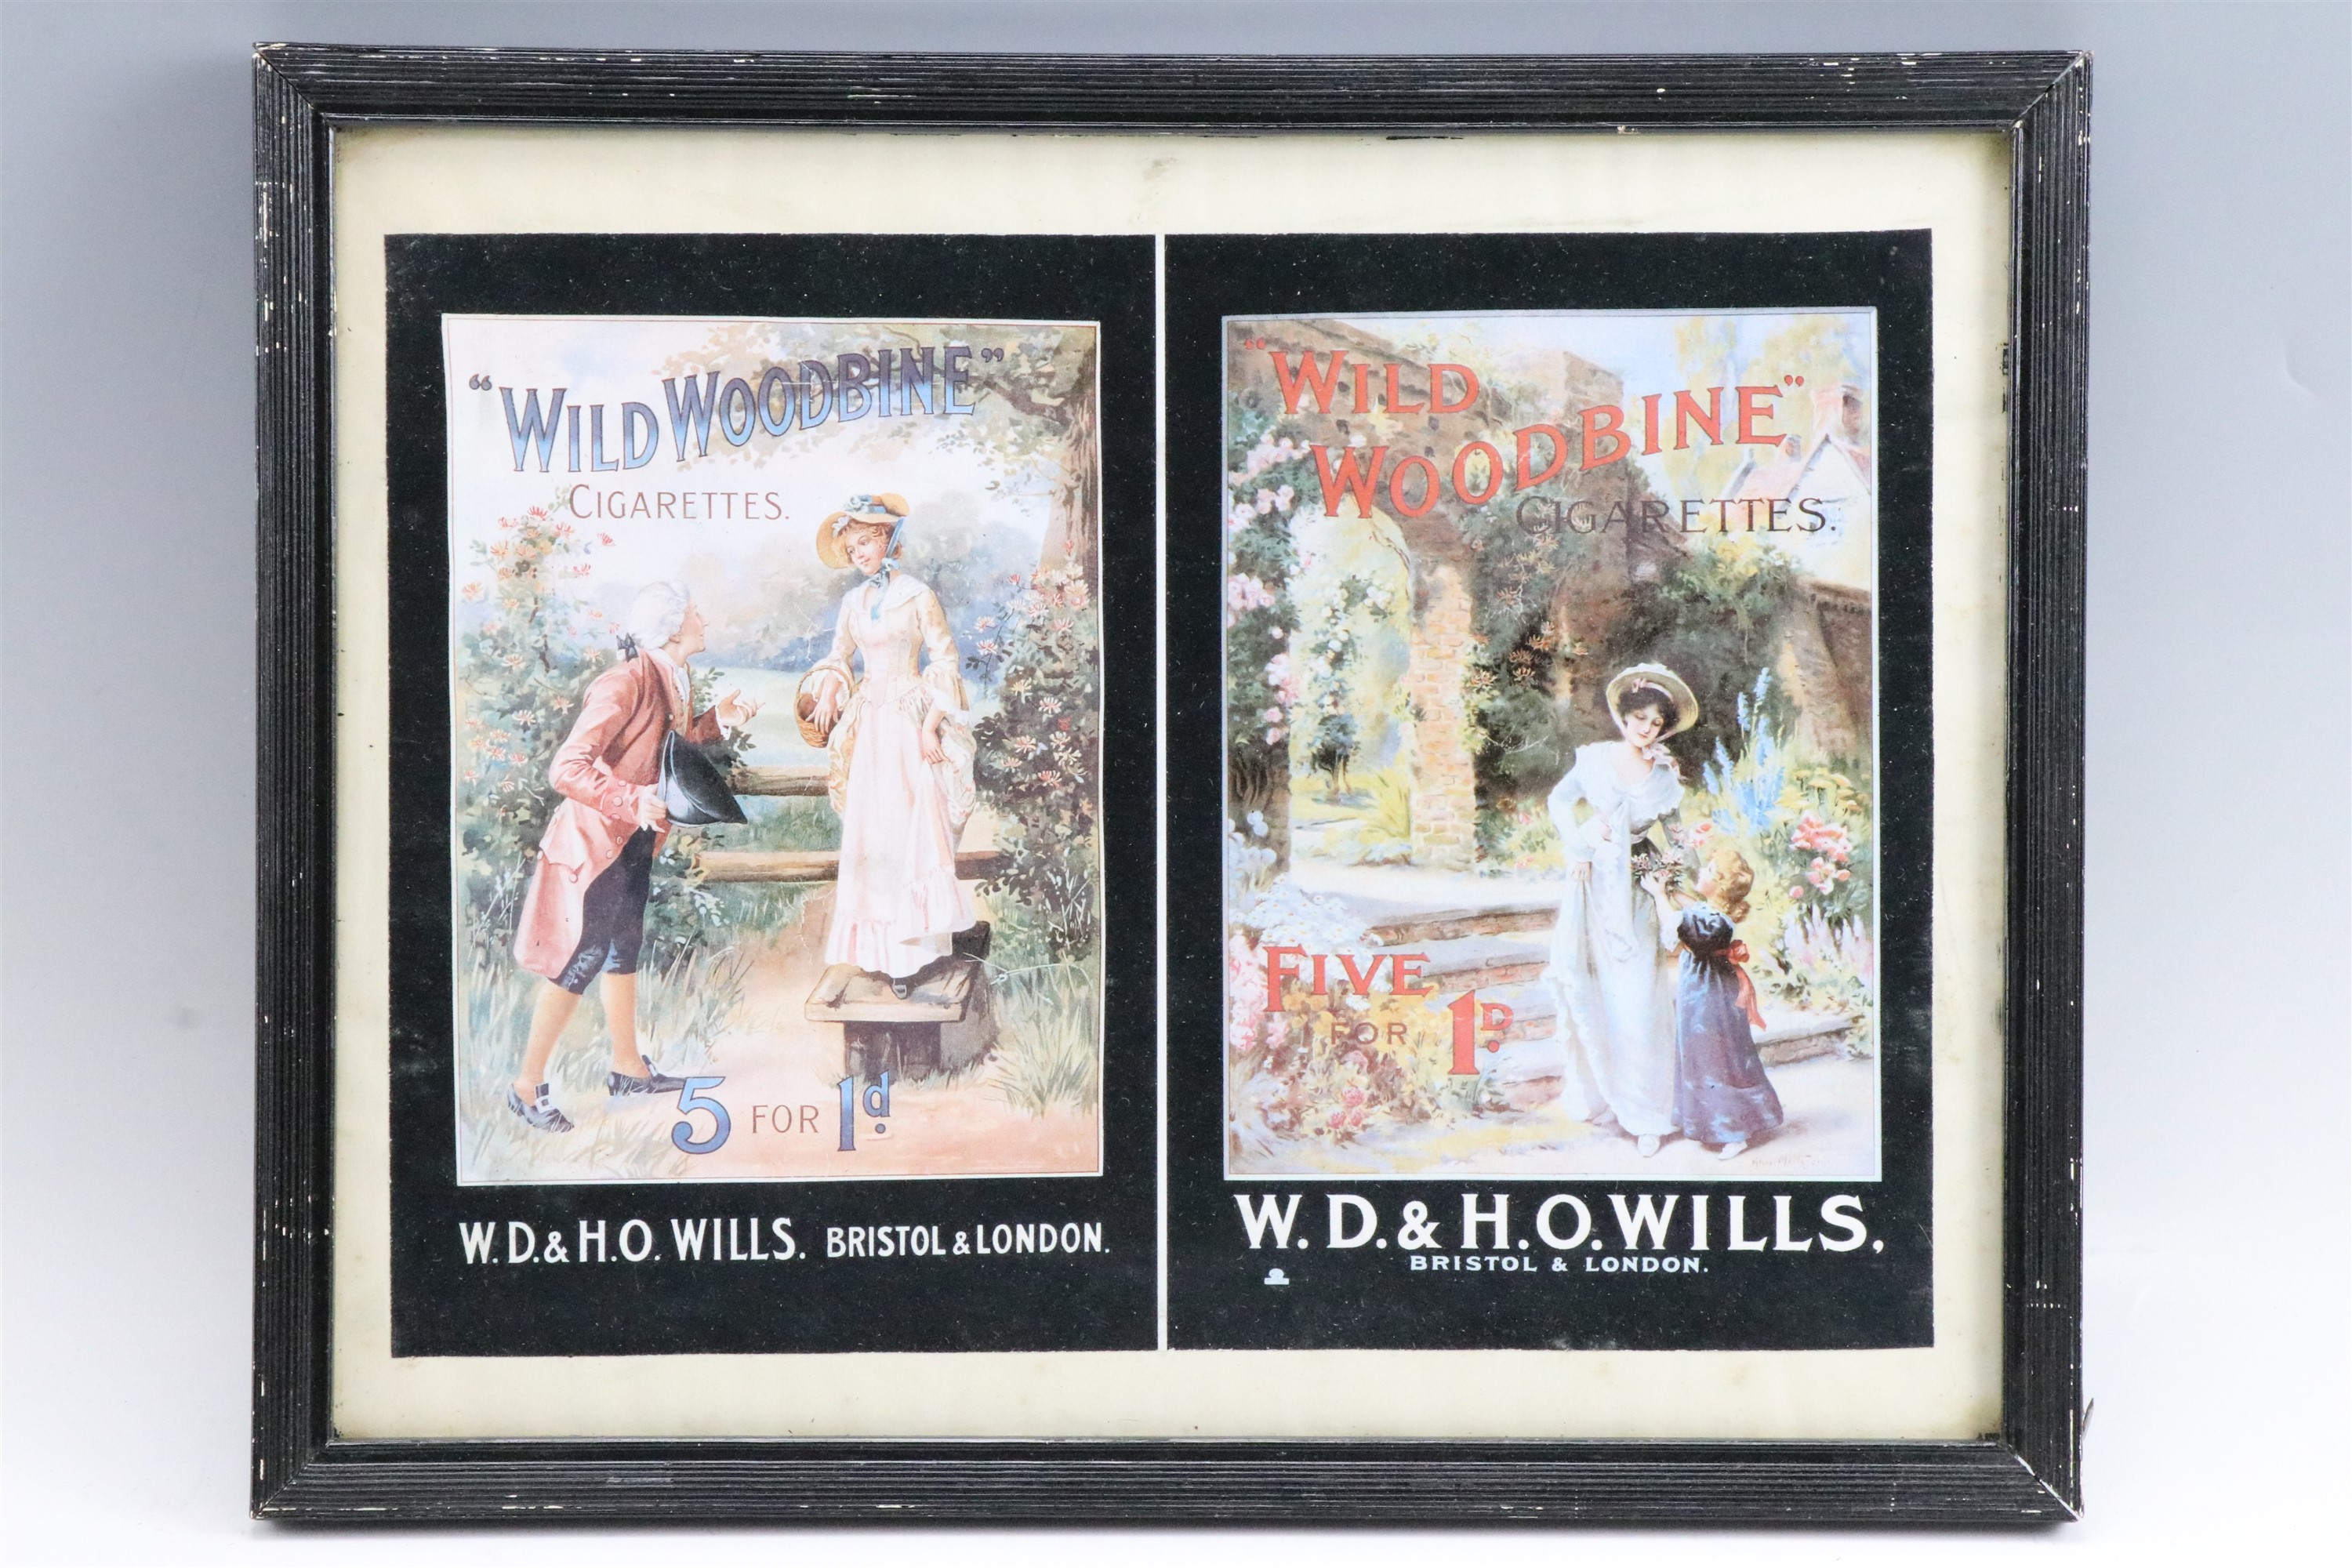 A WD & HO Wills advertising print for "Wild Woodbine" cigarettes, in ebonised frame under glass, - Image 2 of 2